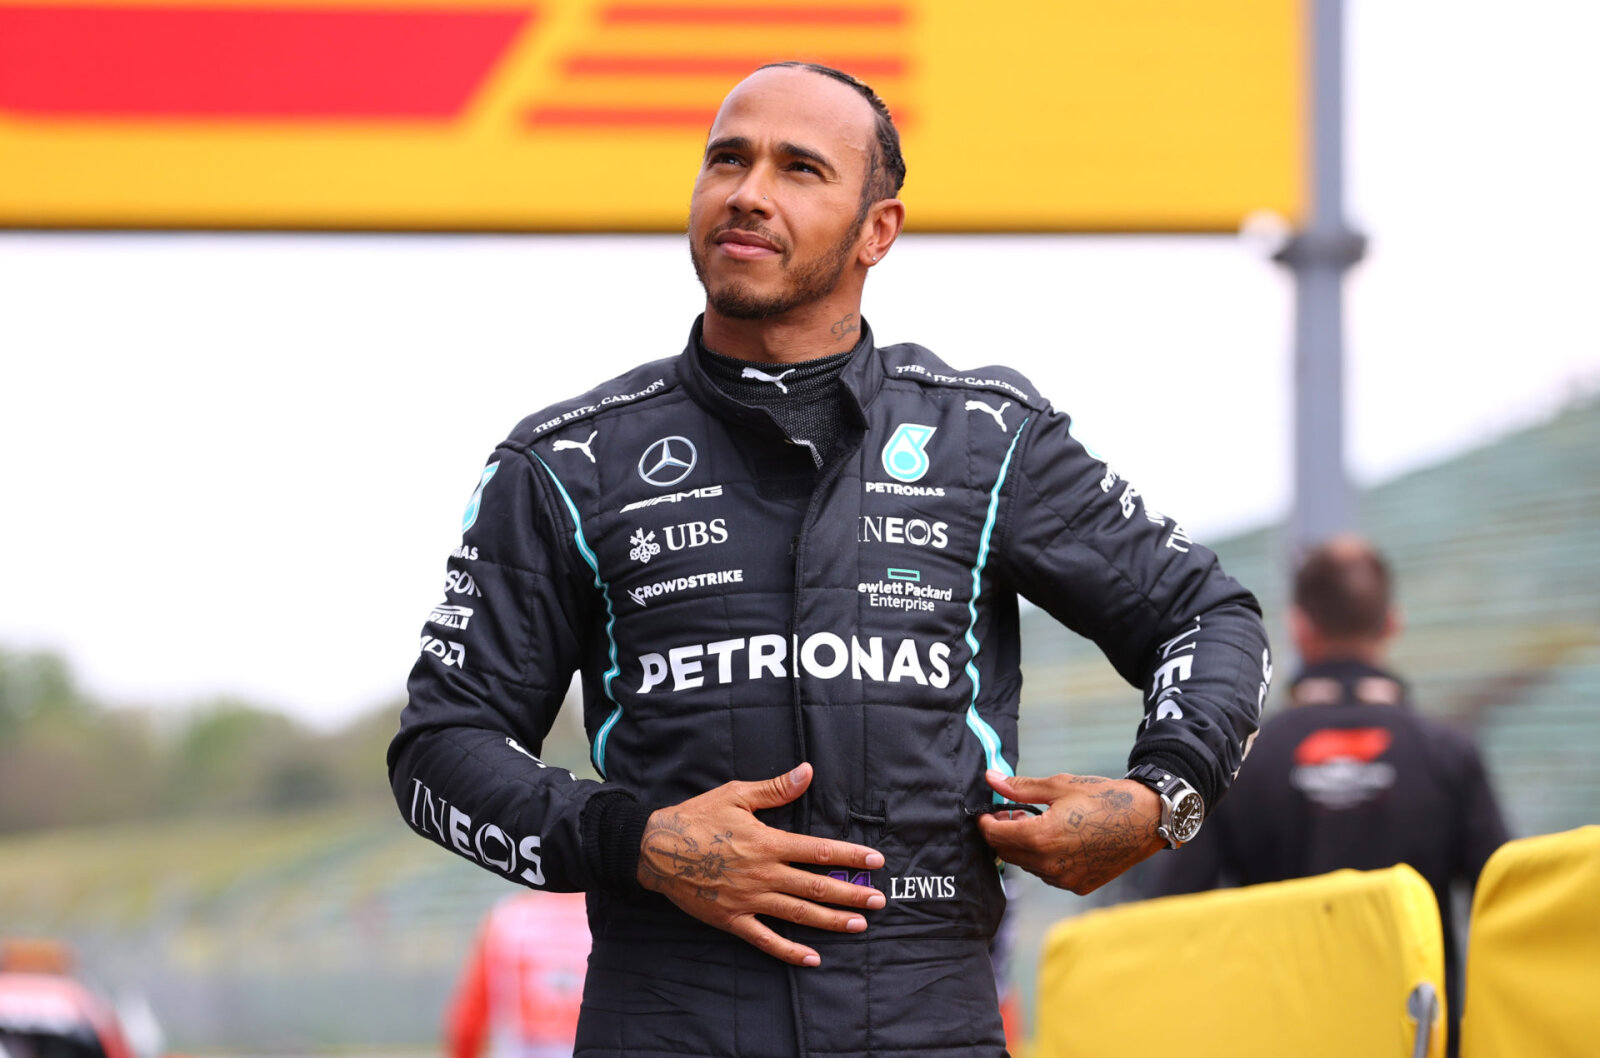 Hamilton wants more diversity in F1 gives recommendations